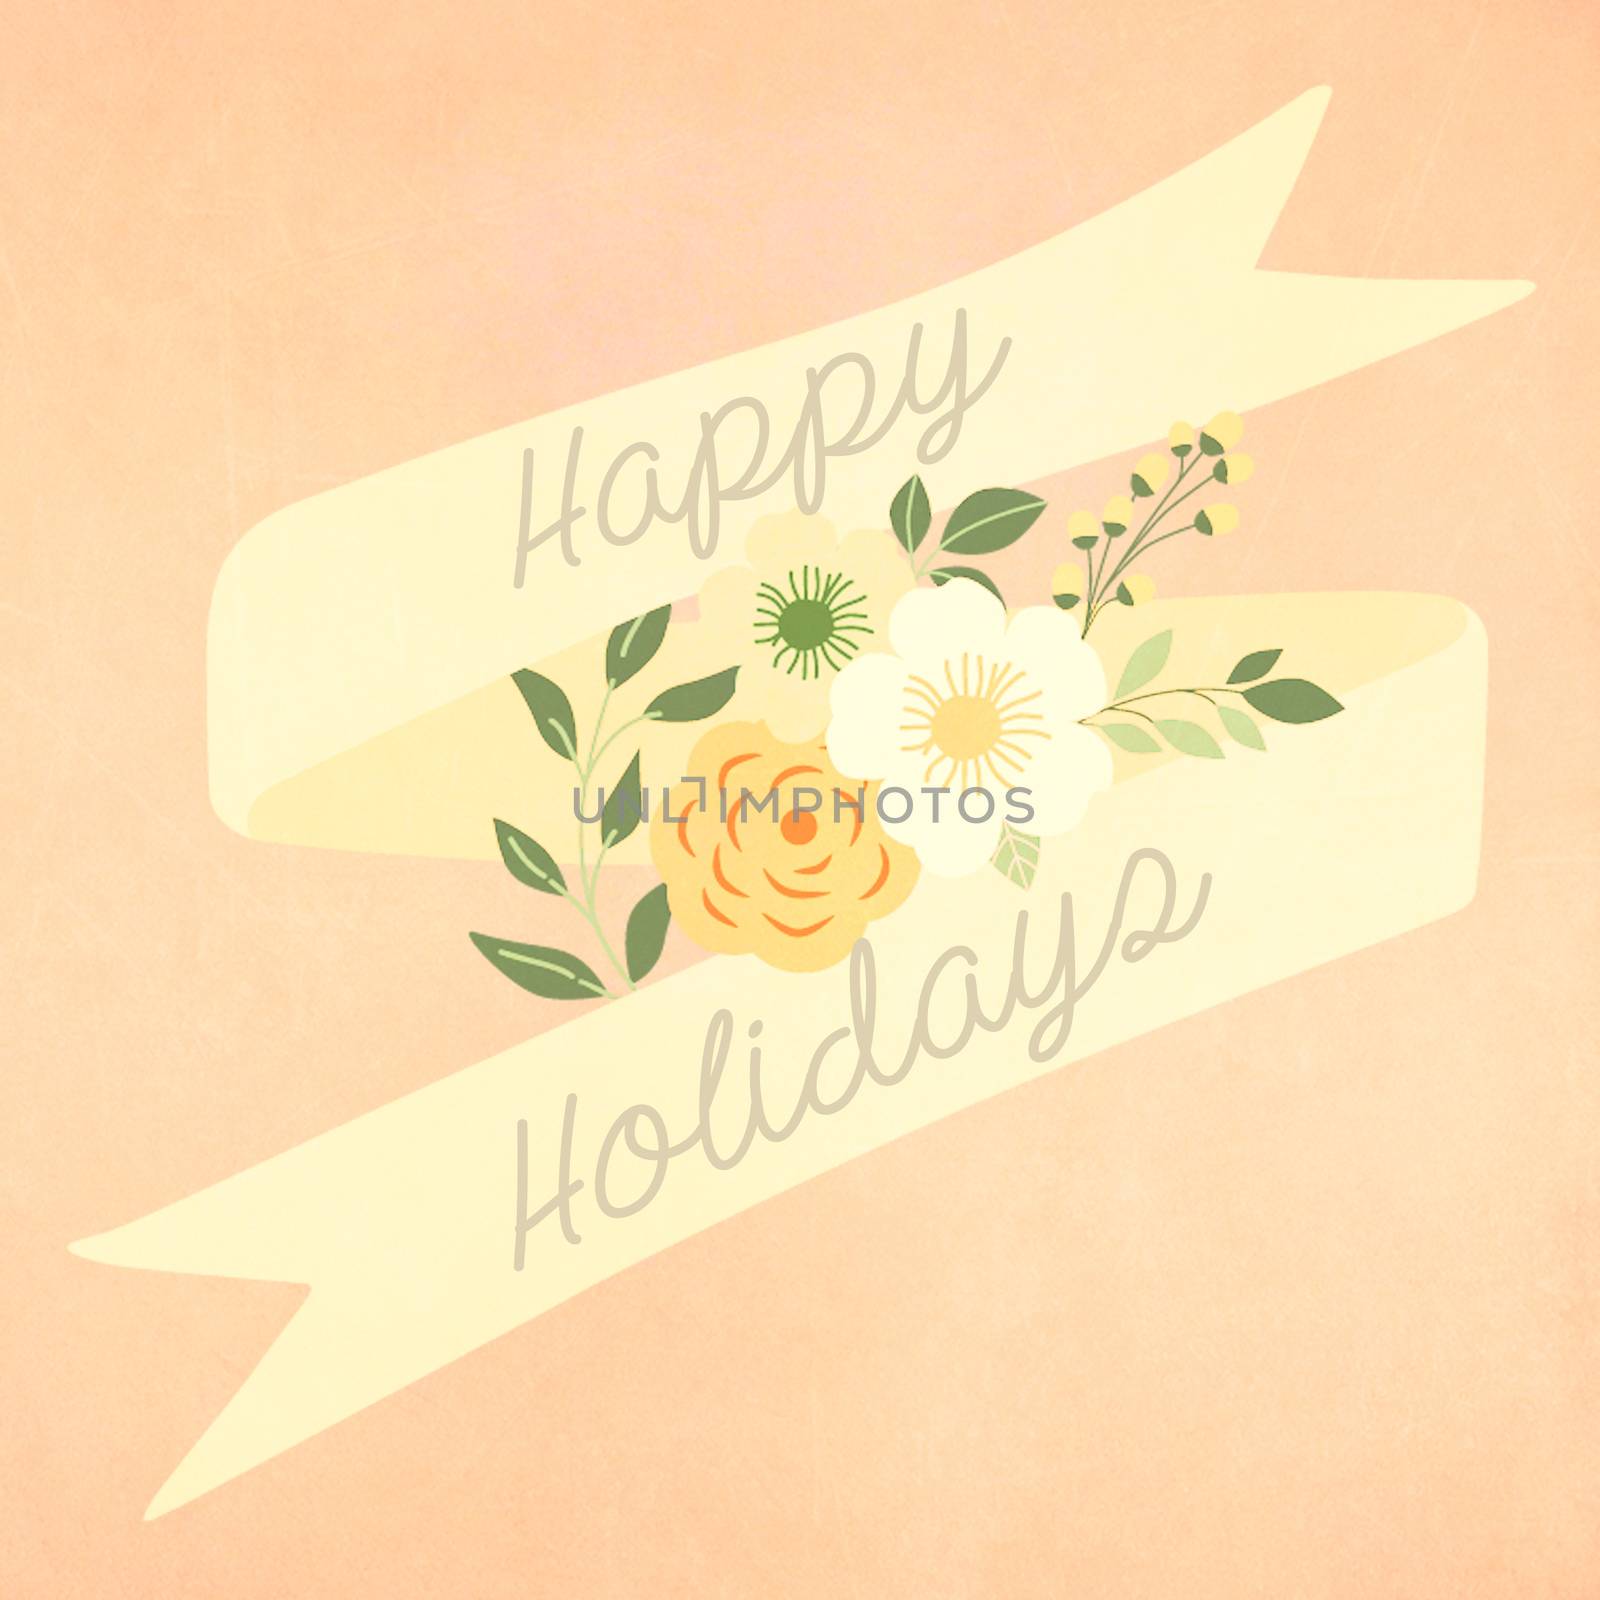 Happy holidays greeting card with retro vintage style